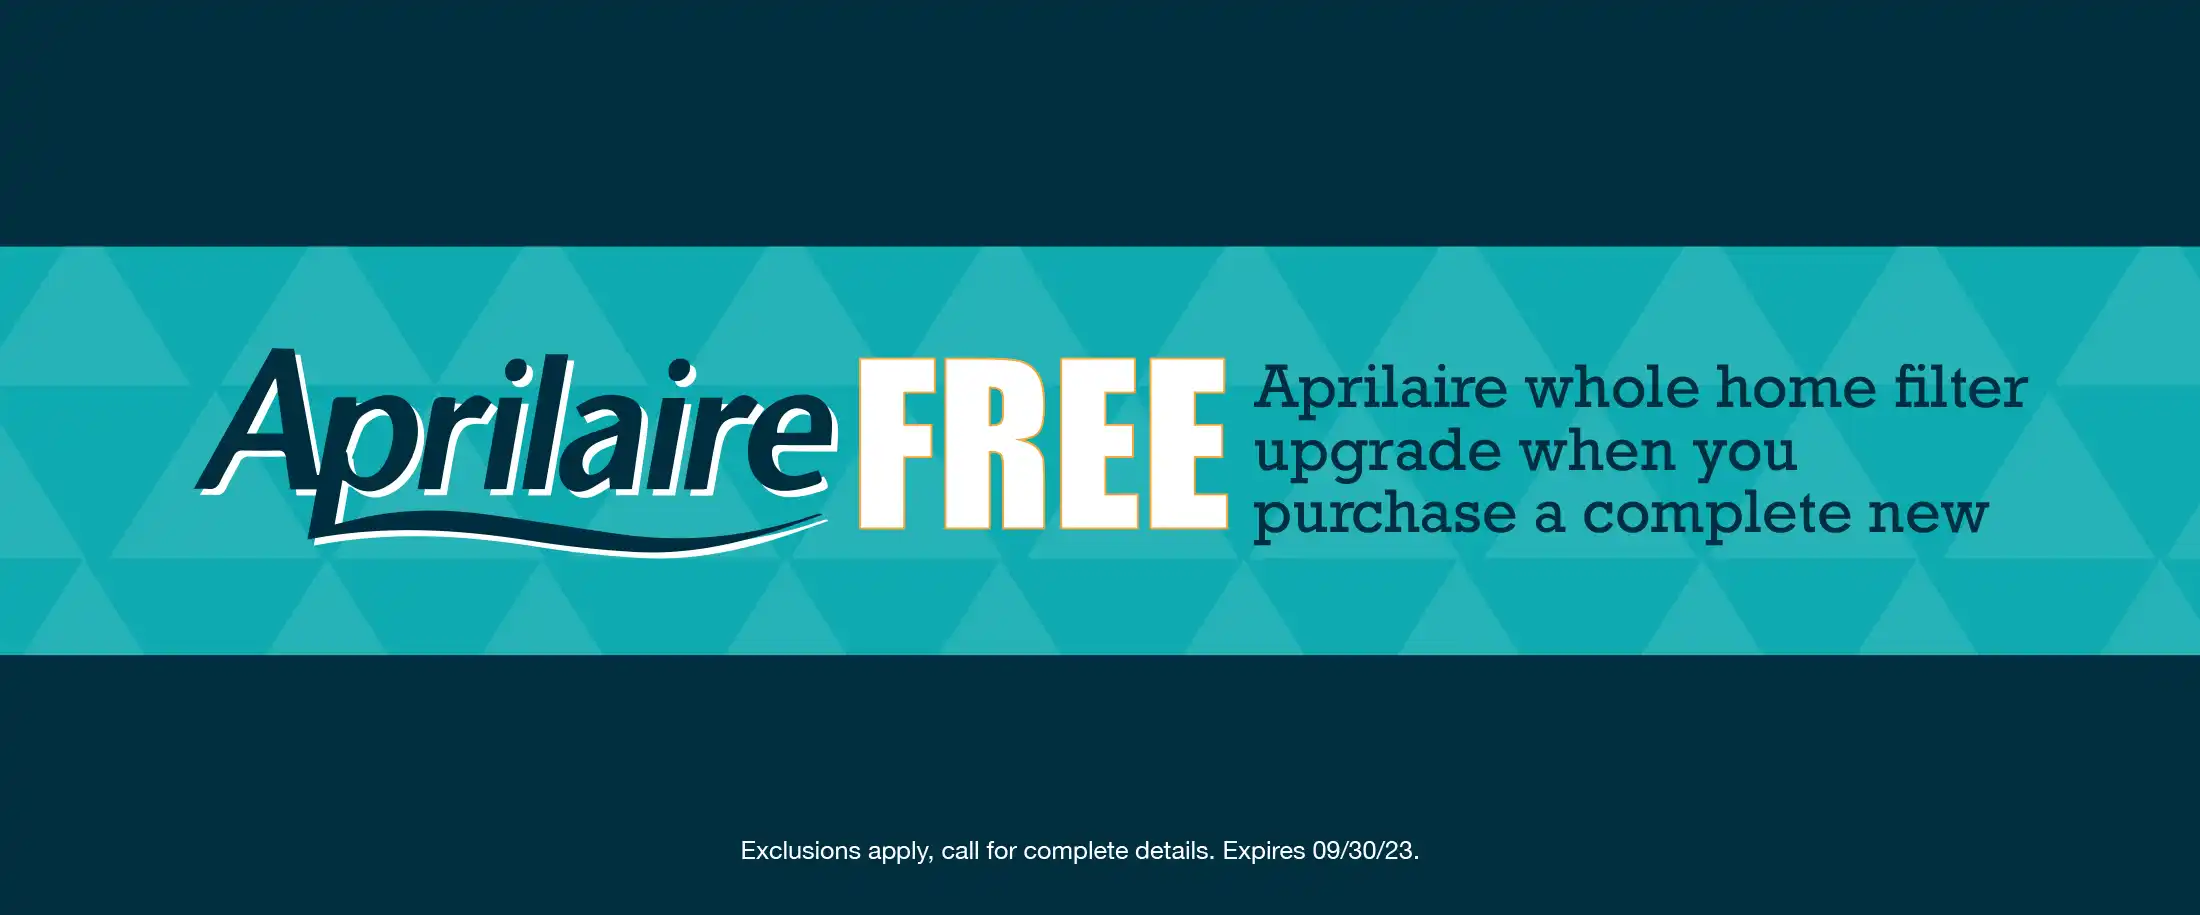 Enjoy a free Aprilaire whole home filter upgrade when you purchase a new Furnace in Burbank CA.